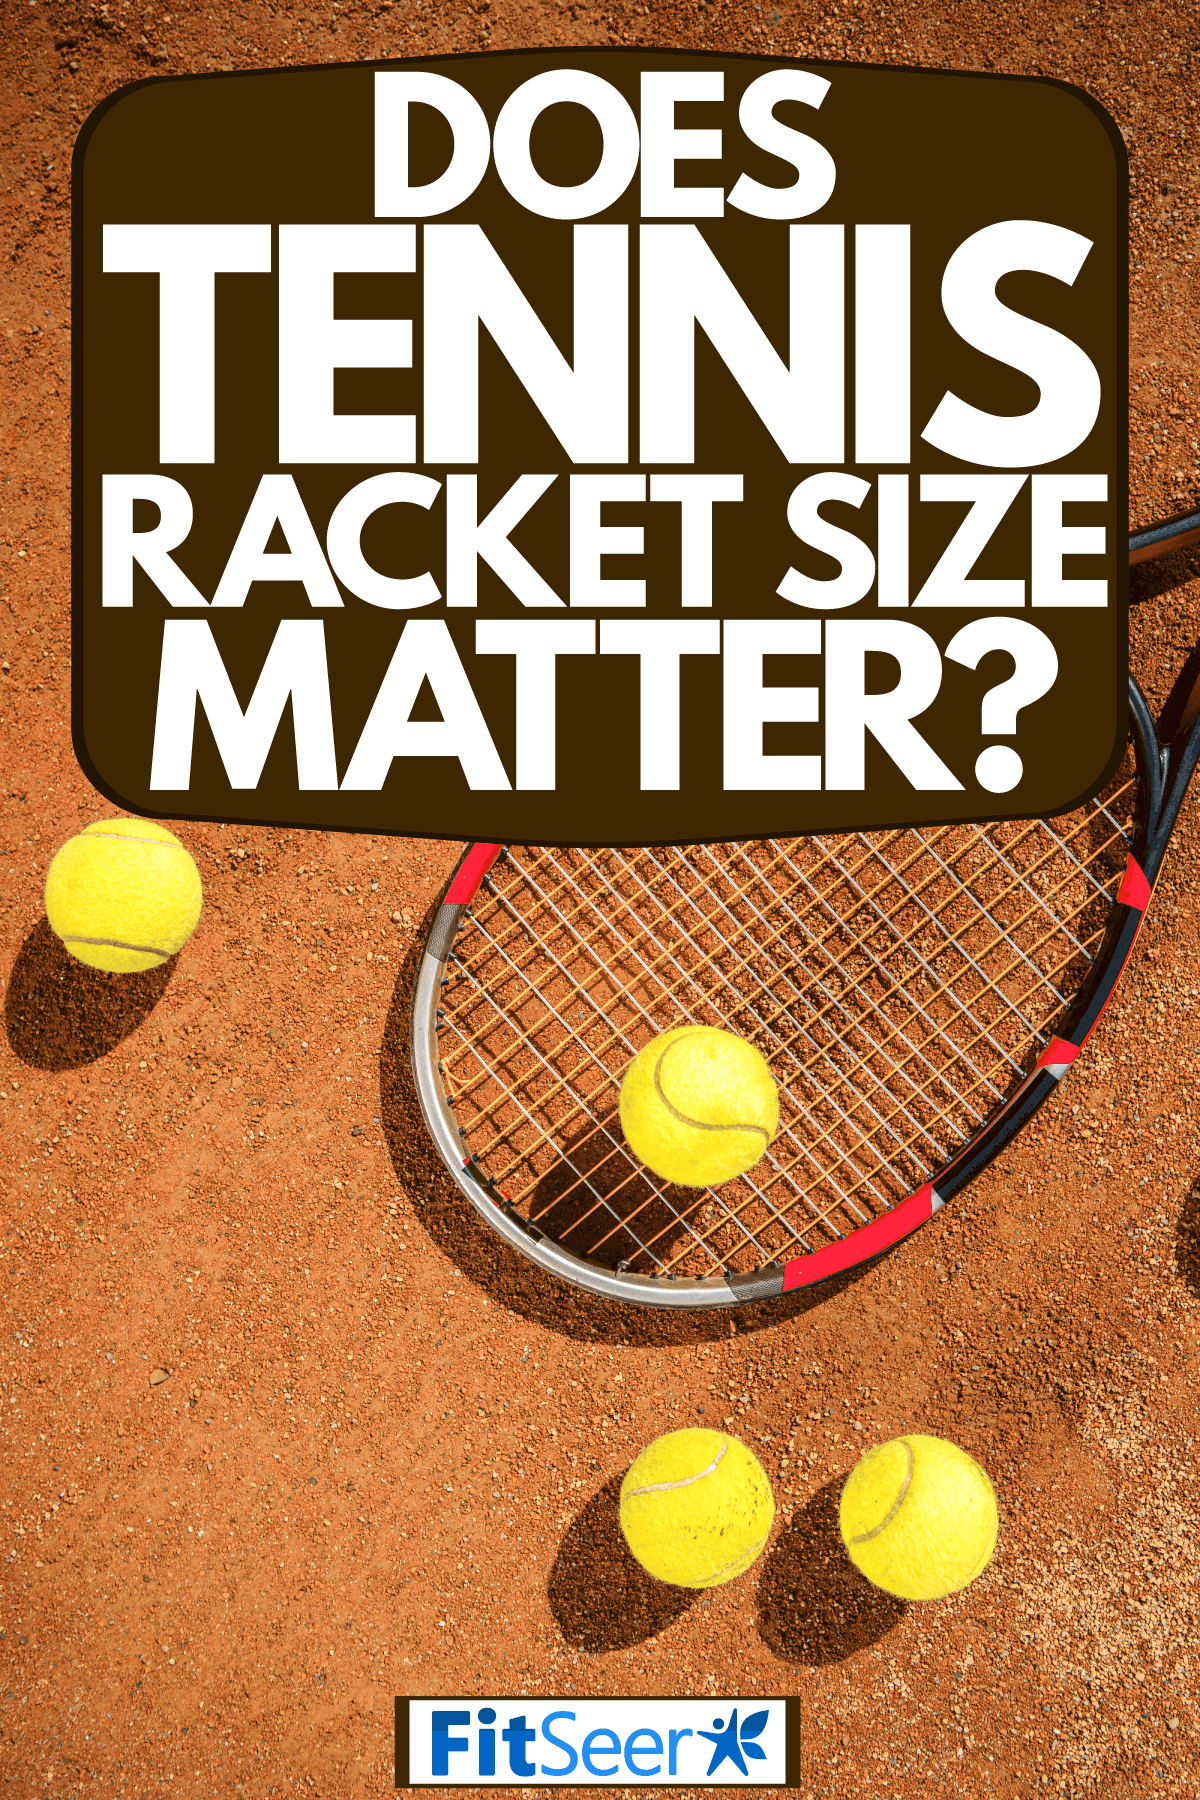 A tennis racket placed on the ground along with other tennis balls, Does Tennis Racket Size Matter?